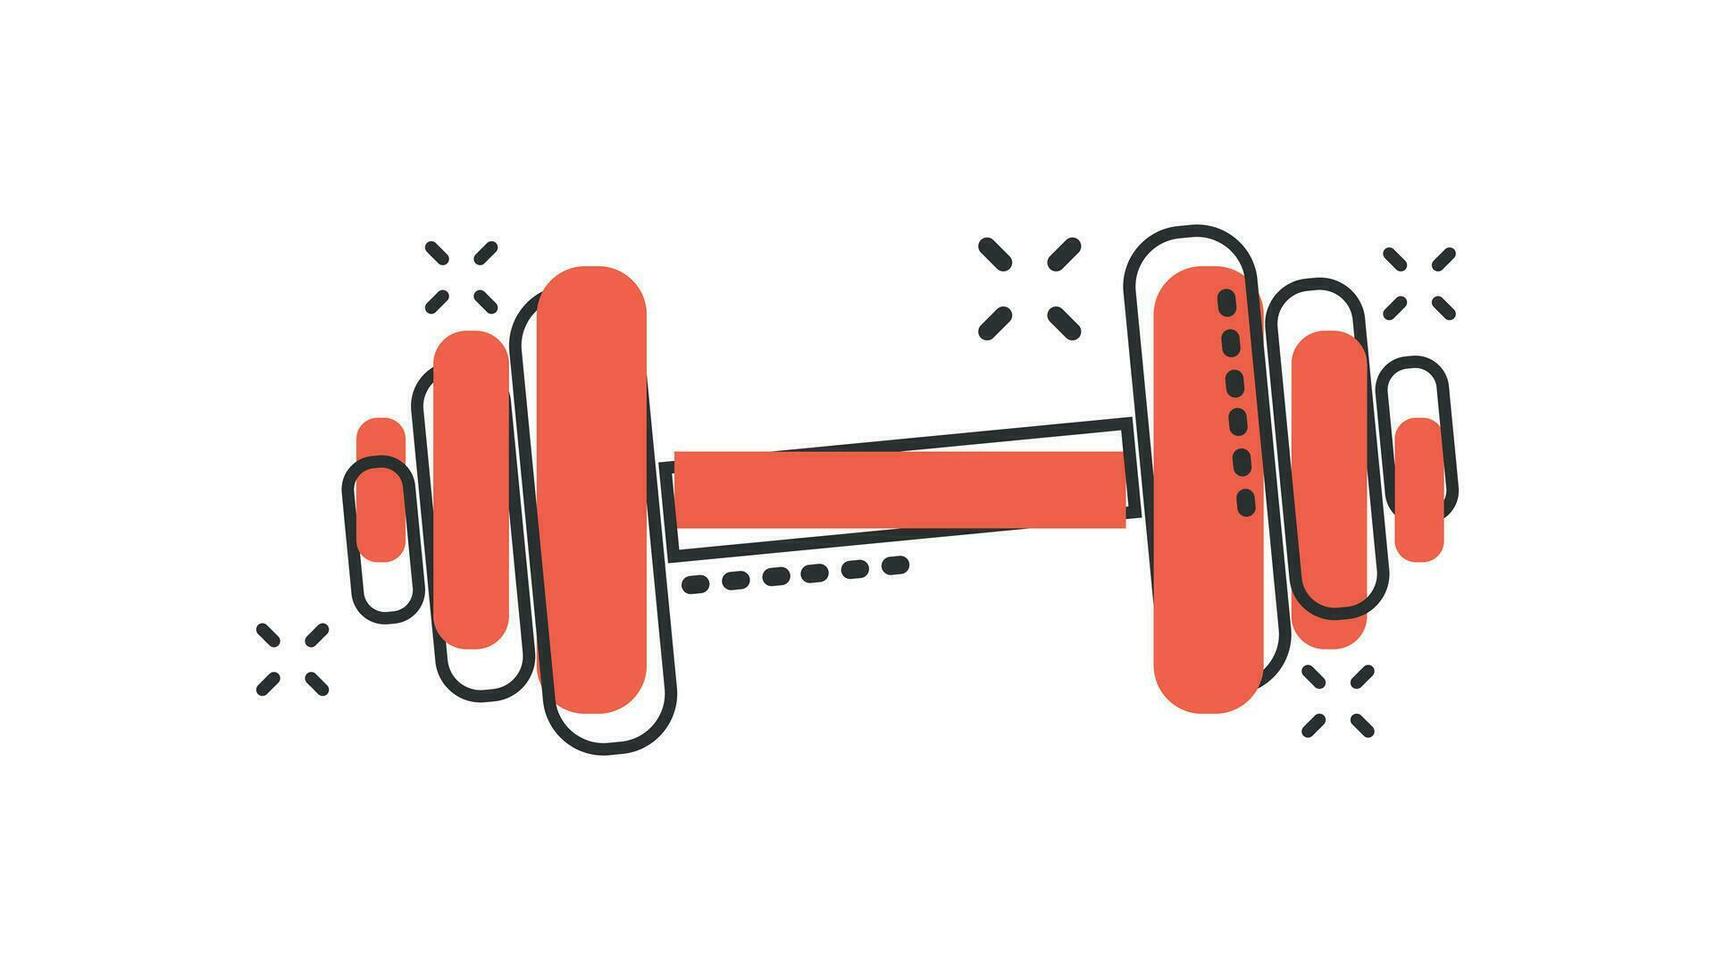 Vector cartoon dumbbell fitness gym icon in comic style. Barbell concept illustration pictogram. Bodybuilding sport business splash effect concept.